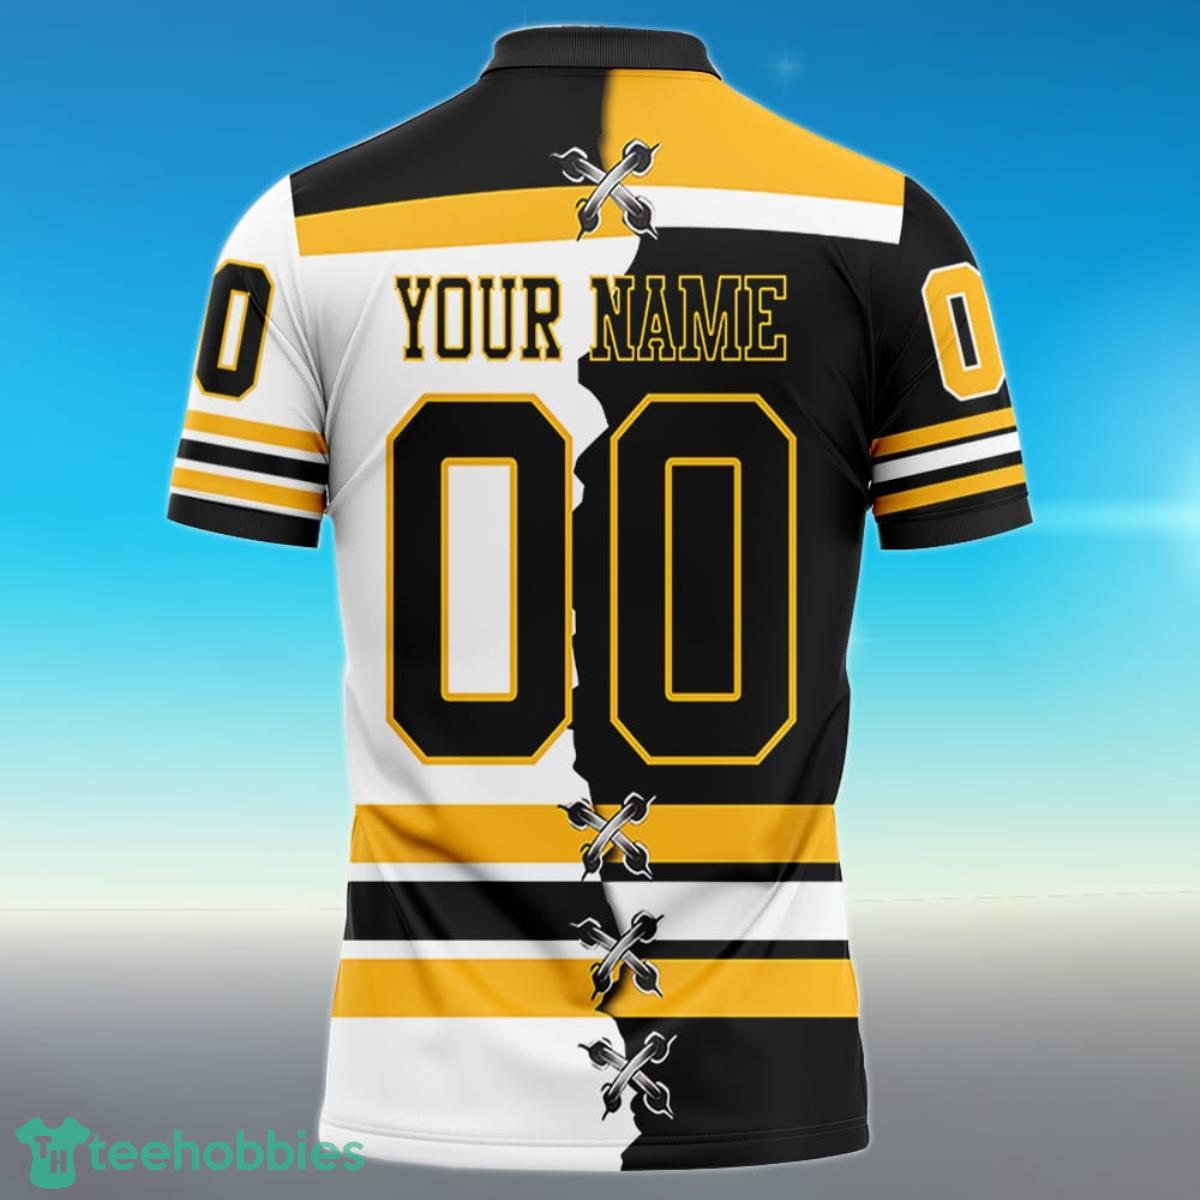 Nhl Boston Bruins Personalized Custom Ugly Christmas Sweaters